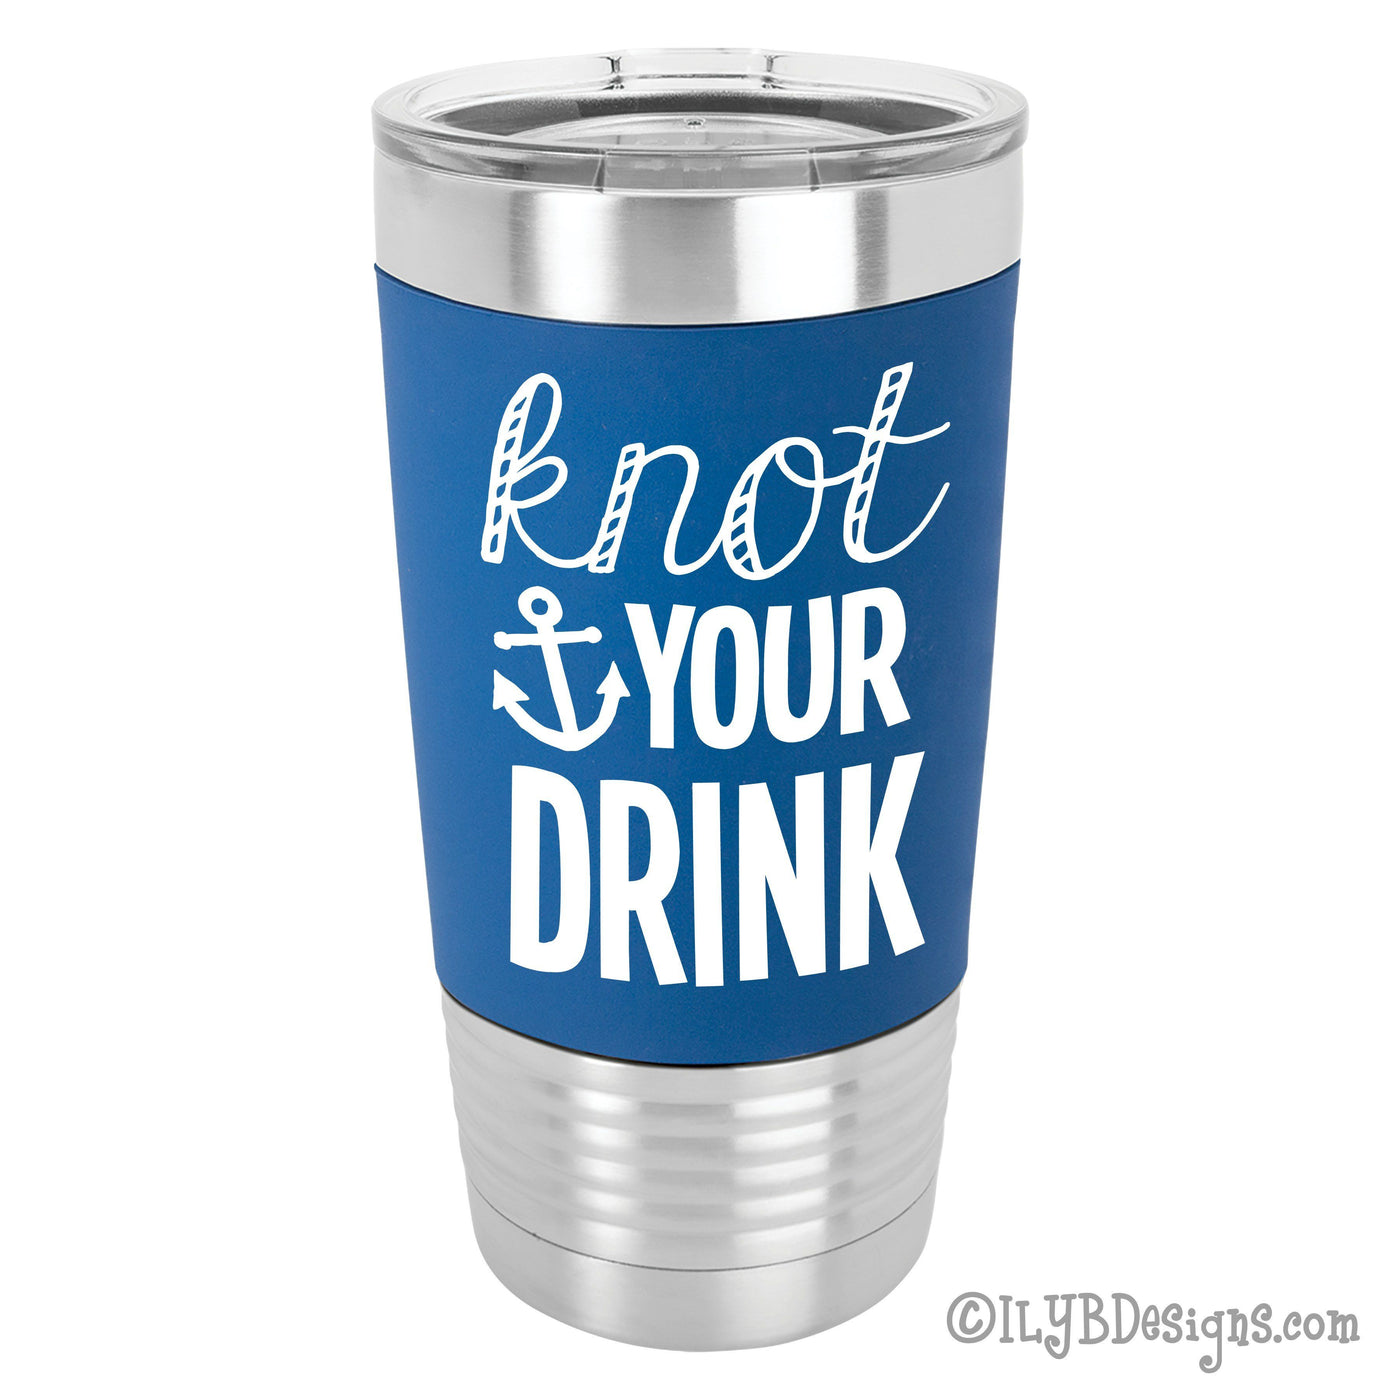 Knot Your Drink personalized Stainless Steel Tumbler with royal blue silicone sleeve laser engraved with white words saying "knot your drink" with an anchor on the side.